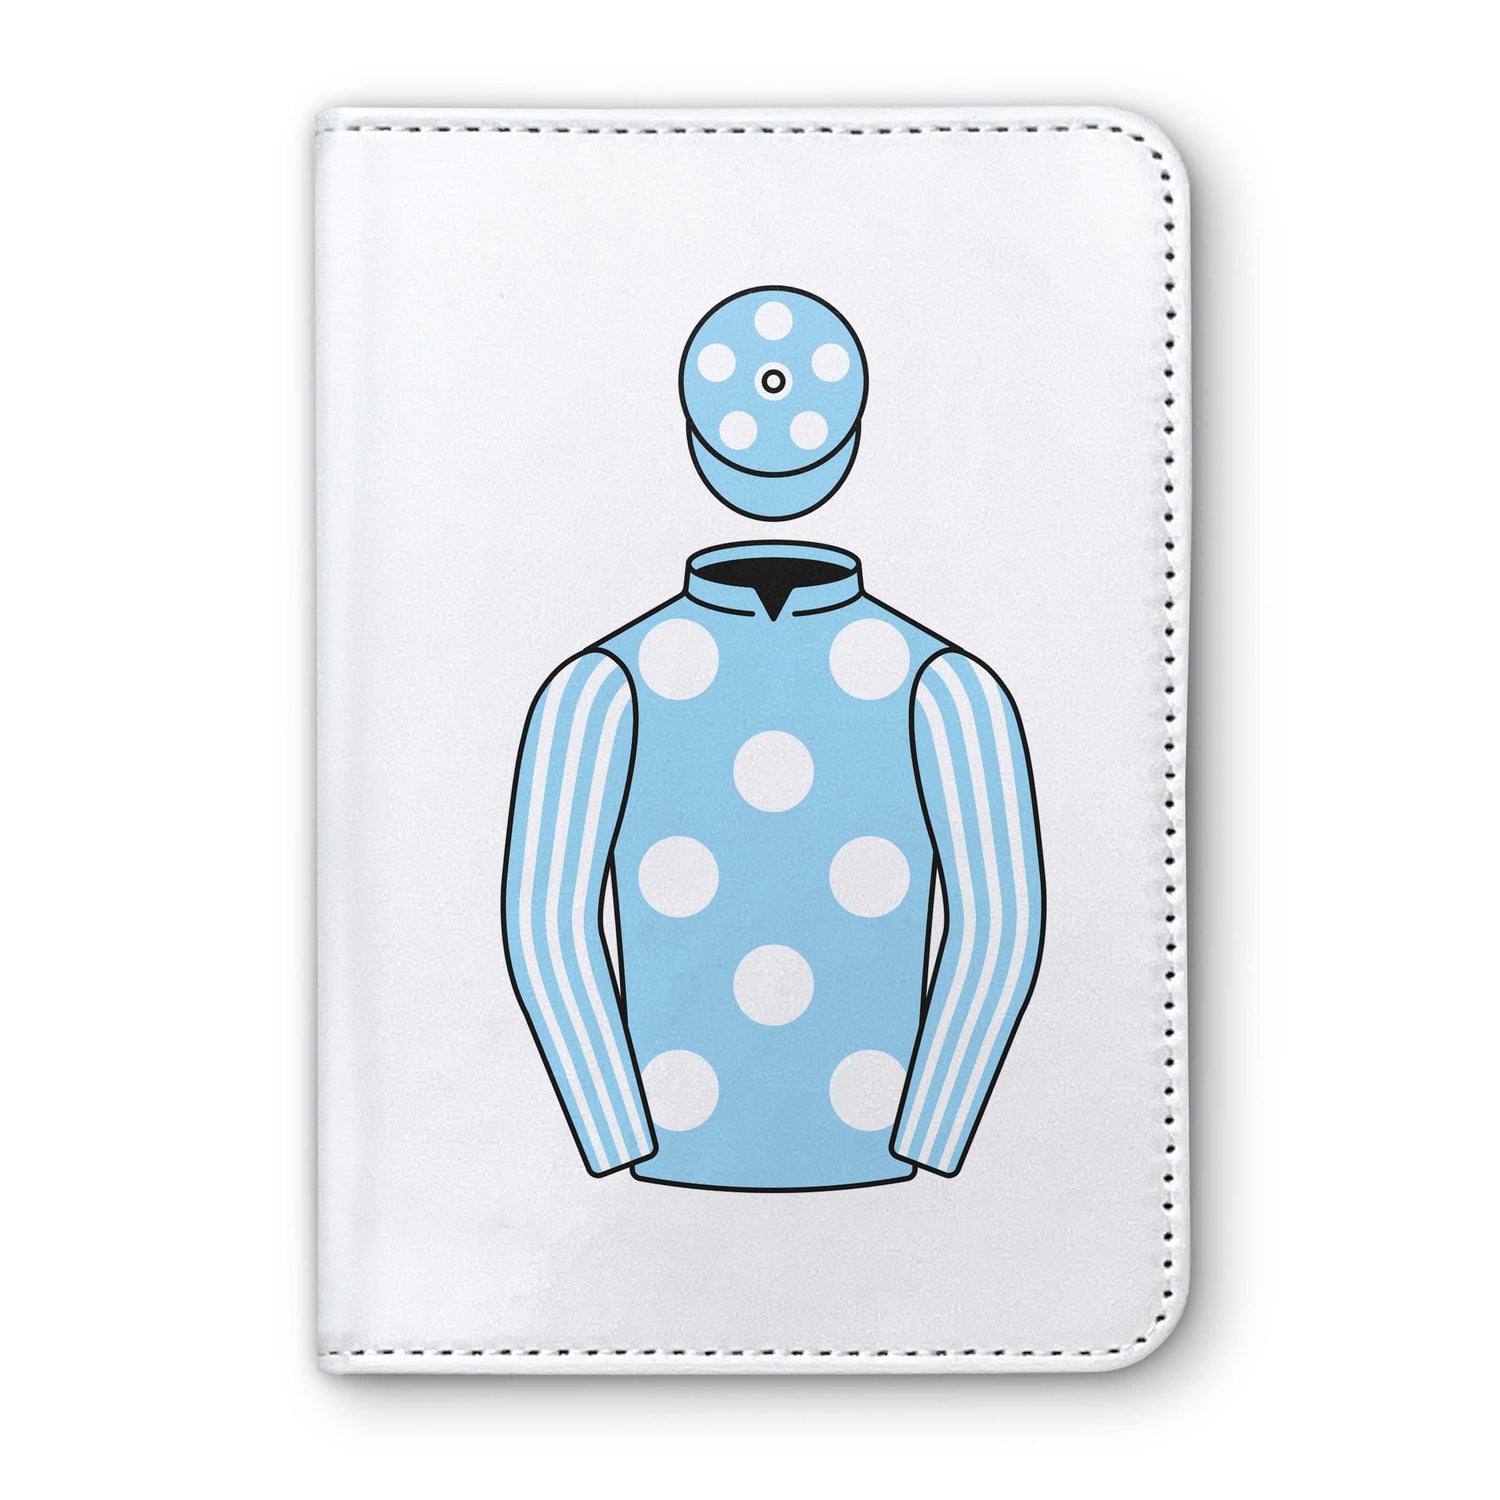 Kenneth Alexander Horse Racing Passport Holder - Hacked Up Horse Racing Gifts